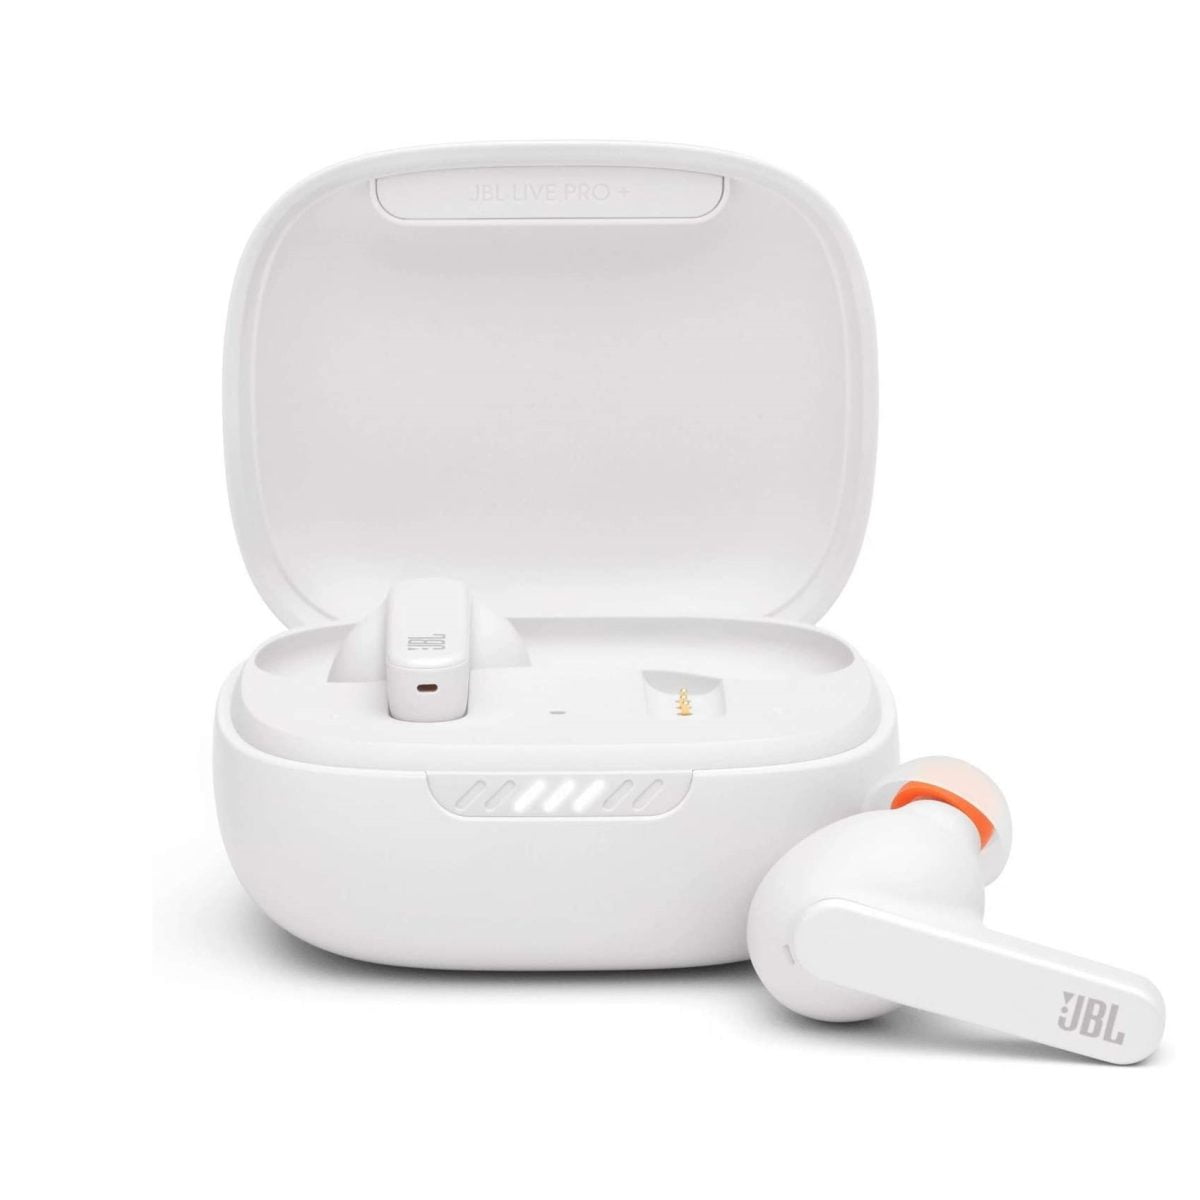 61 1Gmbl. Ac Sl1500 Jbl &Amp;Lt;H1&Amp;Gt;Jbl Live Pro Plus True Wireless Noise Cancelling Earbuds-White&Amp;Lt;/H1&Amp;Gt; Https://Www.youtube.com/Watch?V=Oan6Moxjv58 The Best Audio Solution Not Matter The Device, Jbl Live Pro+ Tws Delivers An Immersive True Wireless Experience With Incredible Jbl Signature Sound. Let Smart Ambient Connect You To Your Environment, Or Focus On The Music With Adaptive Noise Cancelling. Then Switch Easily From Tunes To Group Calls With 4 Mics (2 Beamforming Mics Per Side) To Capture Your Voice With The Feeling Of Face-To-Face Conversation And A Third Mic For Environmental Noise Reduction. All Commands Are On The Earbuds, So You Can Manage Music And Calls With Your Finger Only. Jbl Earbuds Jbl Live Pro Plus Noise Cancelling Earbuds-White